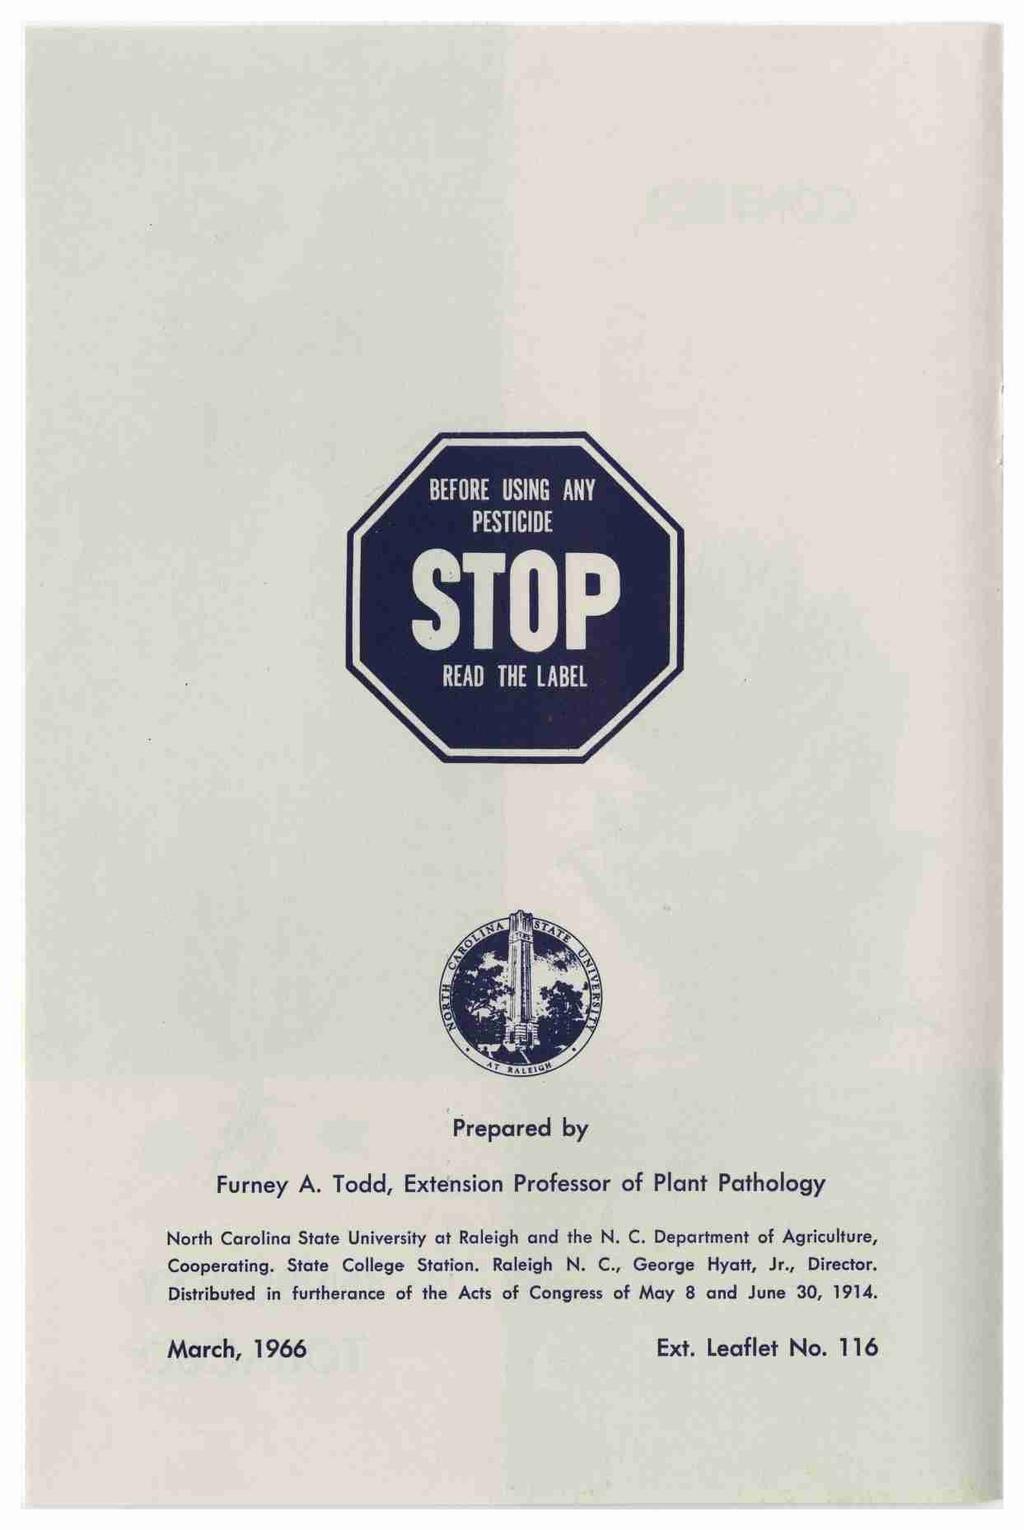 BEFORE USING ANY PESTICIDE STOP READ THE LABEL I Prepared by Furney A. Todd, Extension Professor of Plant Pathology North Carolina State University at Raleigh and the N. C. Department of Agriculture, Cooperating.